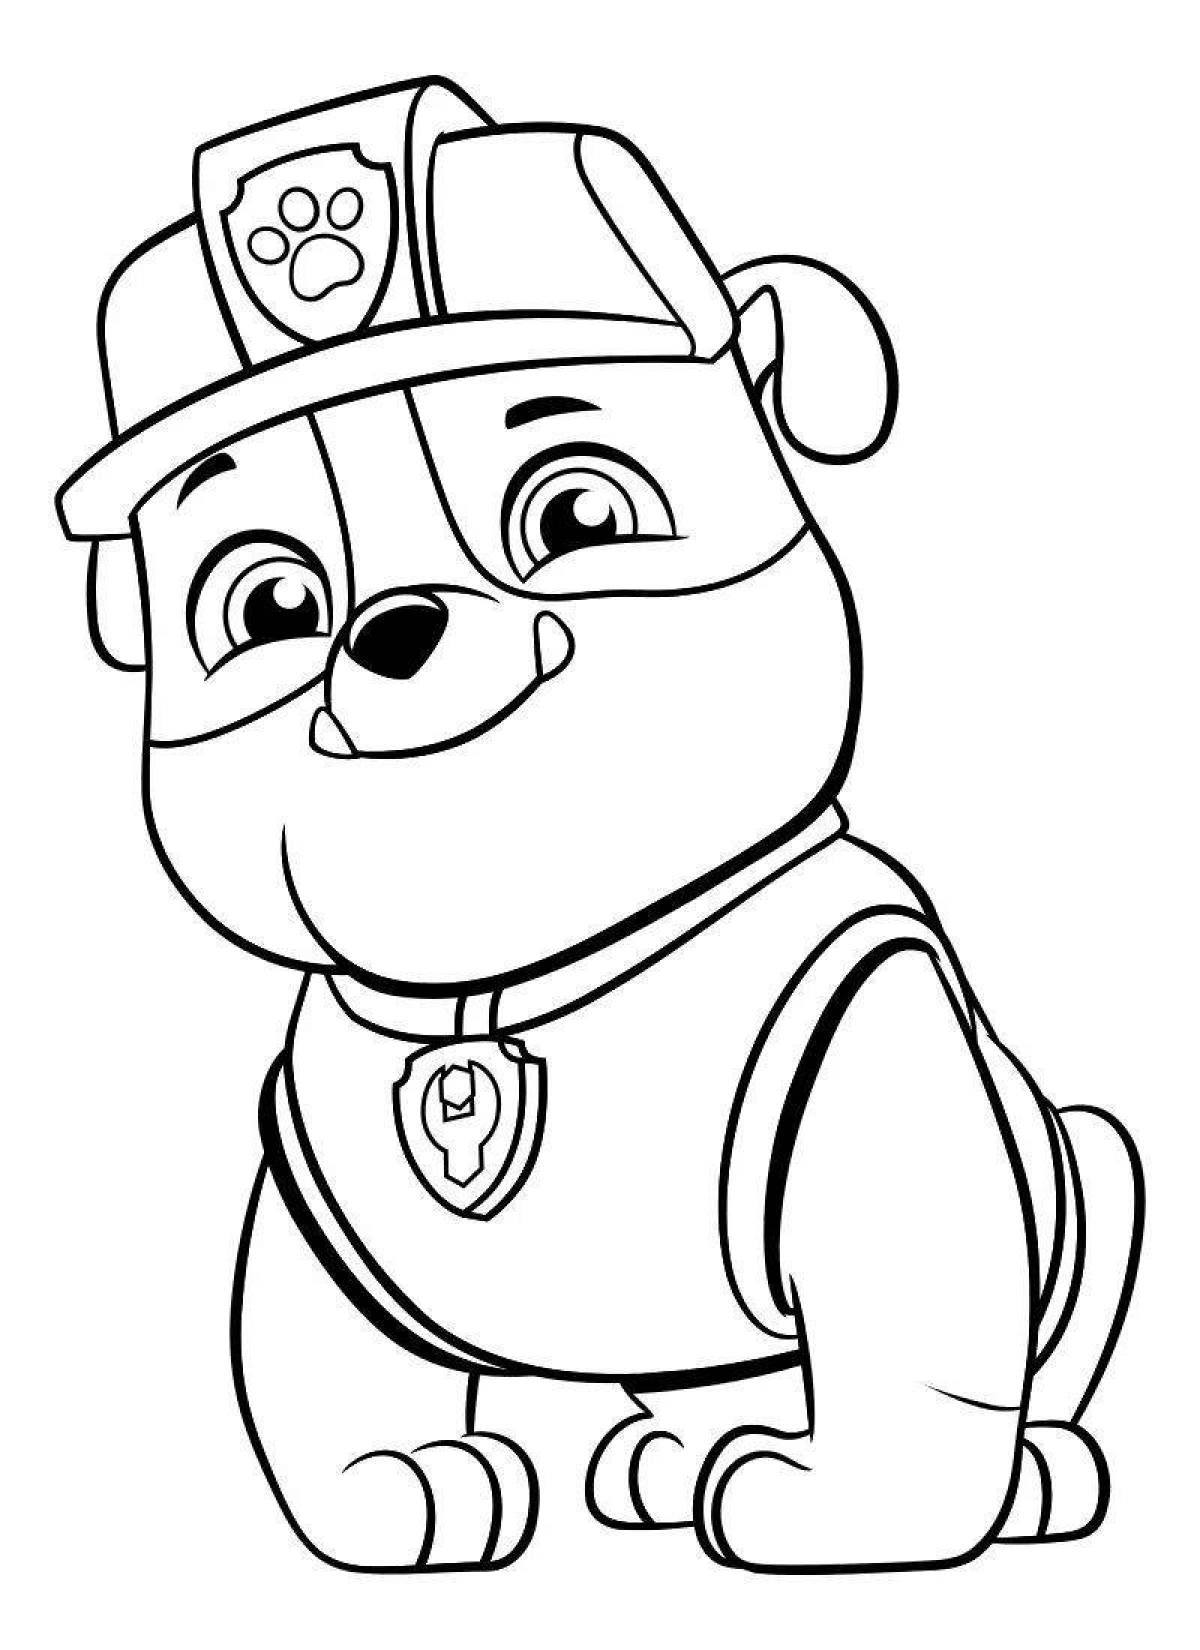 Paw patrol for 5 year olds #3